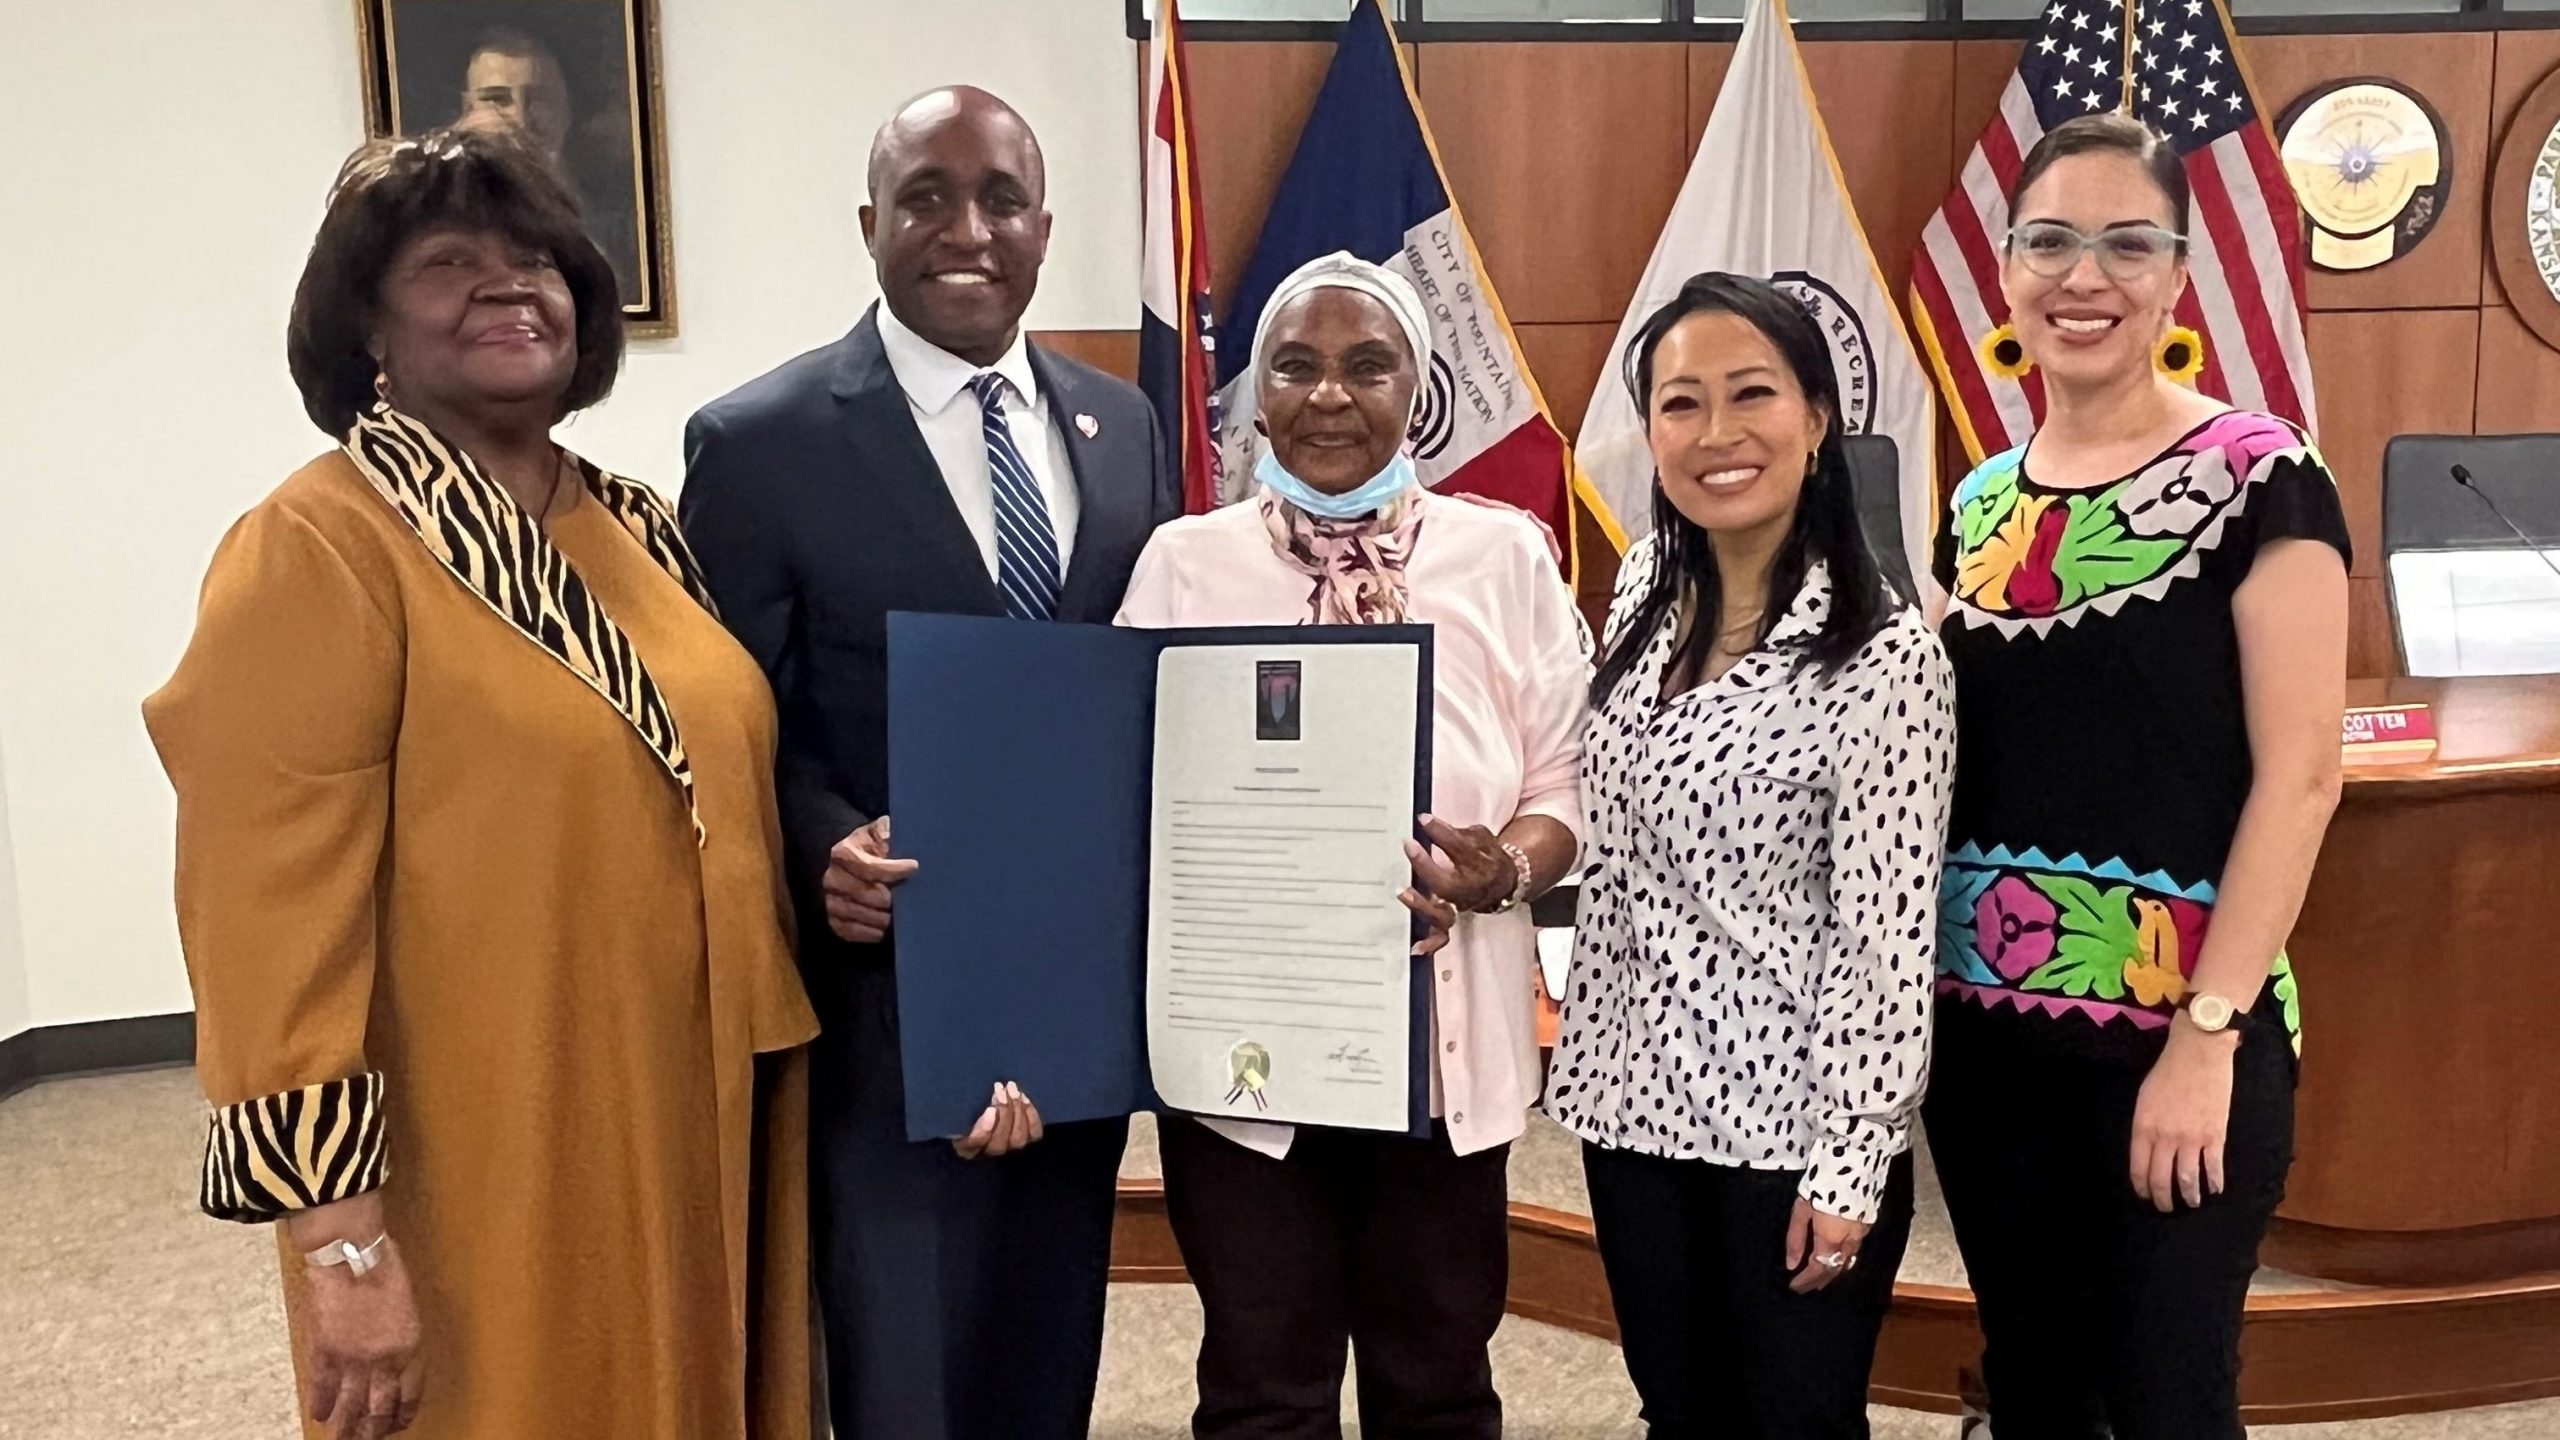 Mayor Proclaims March 27th “Ms. Elise Jackson Day” in Kansas City